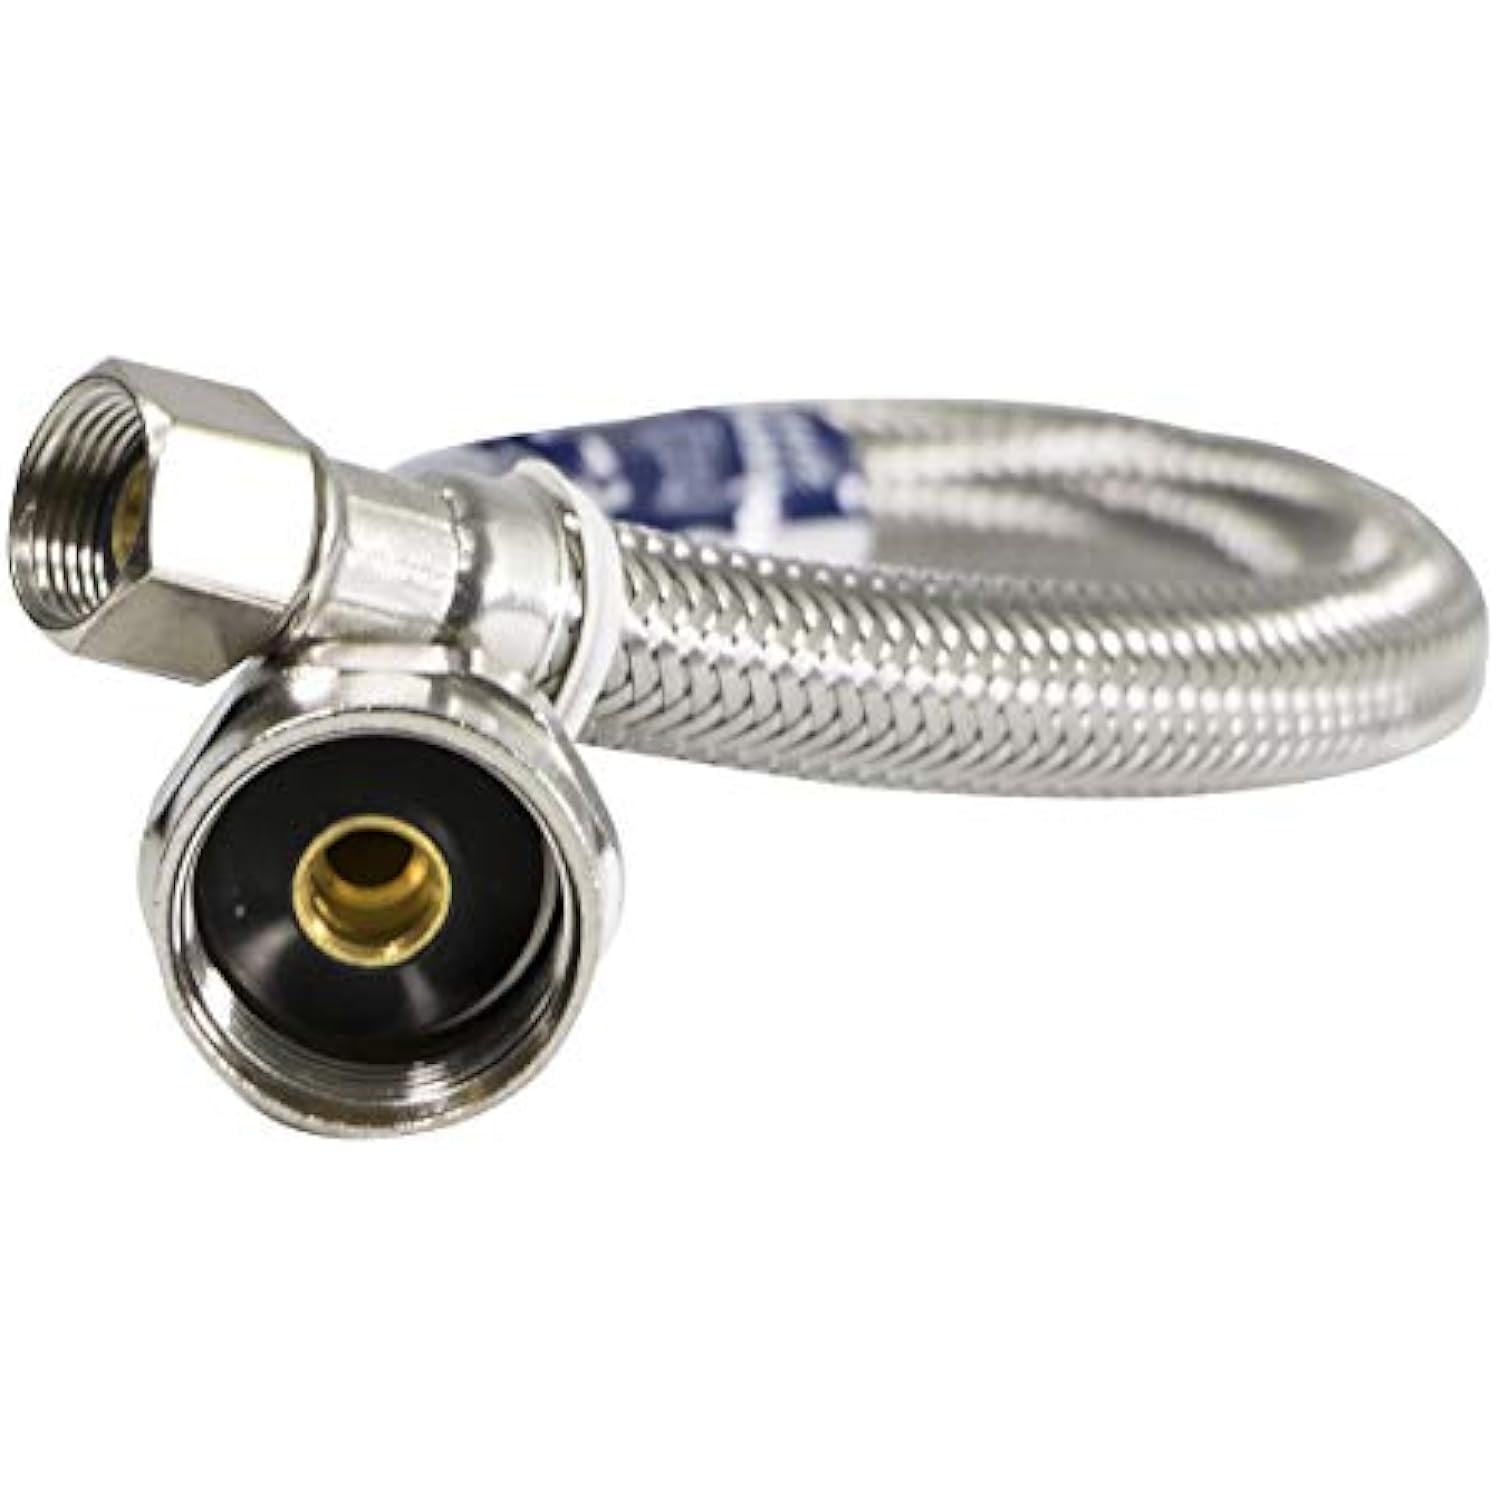 Everflow Supplies 2666-NL Lead Free Stainless Steel Braided Ice Maker Supply Line with Two 1/4 Fittings on Both Ends, 72